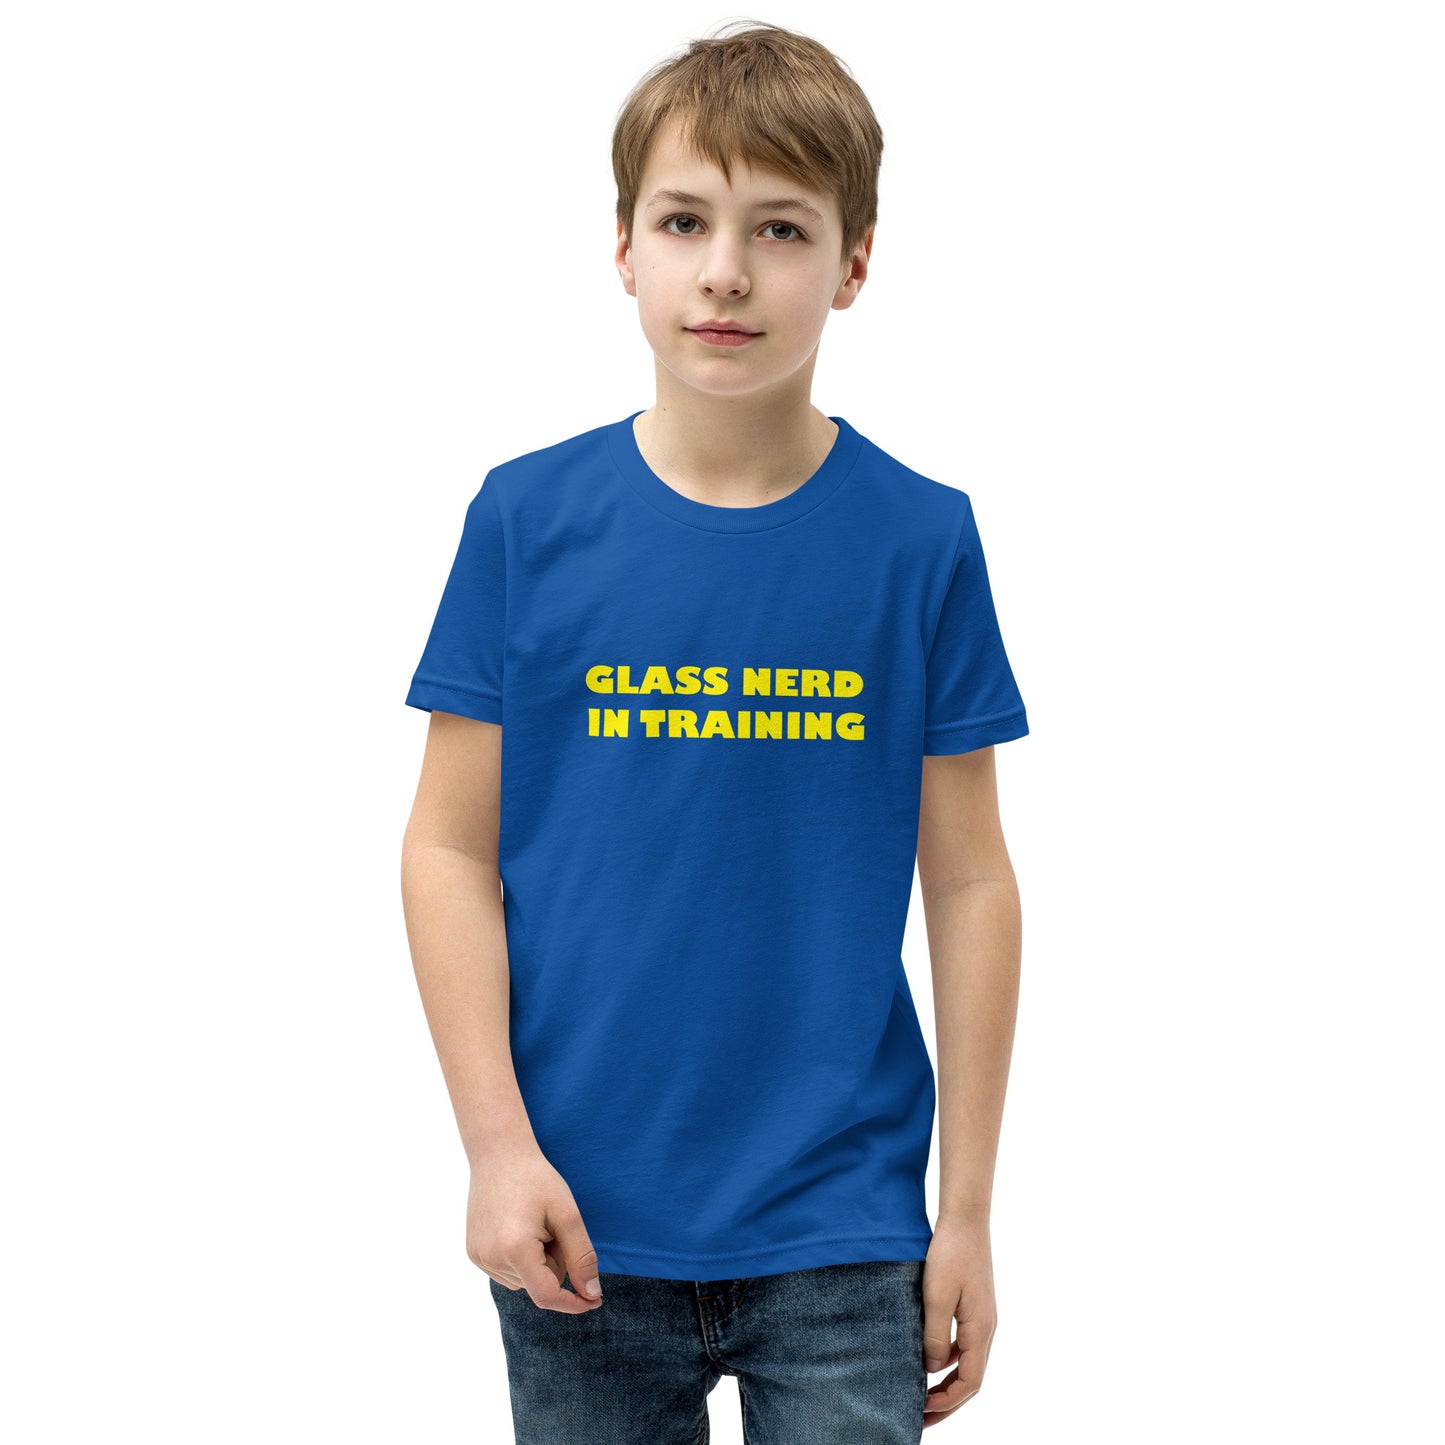 Glass Nerd in Training - Youth Staple Tee - Bella + Canvas 3001Y